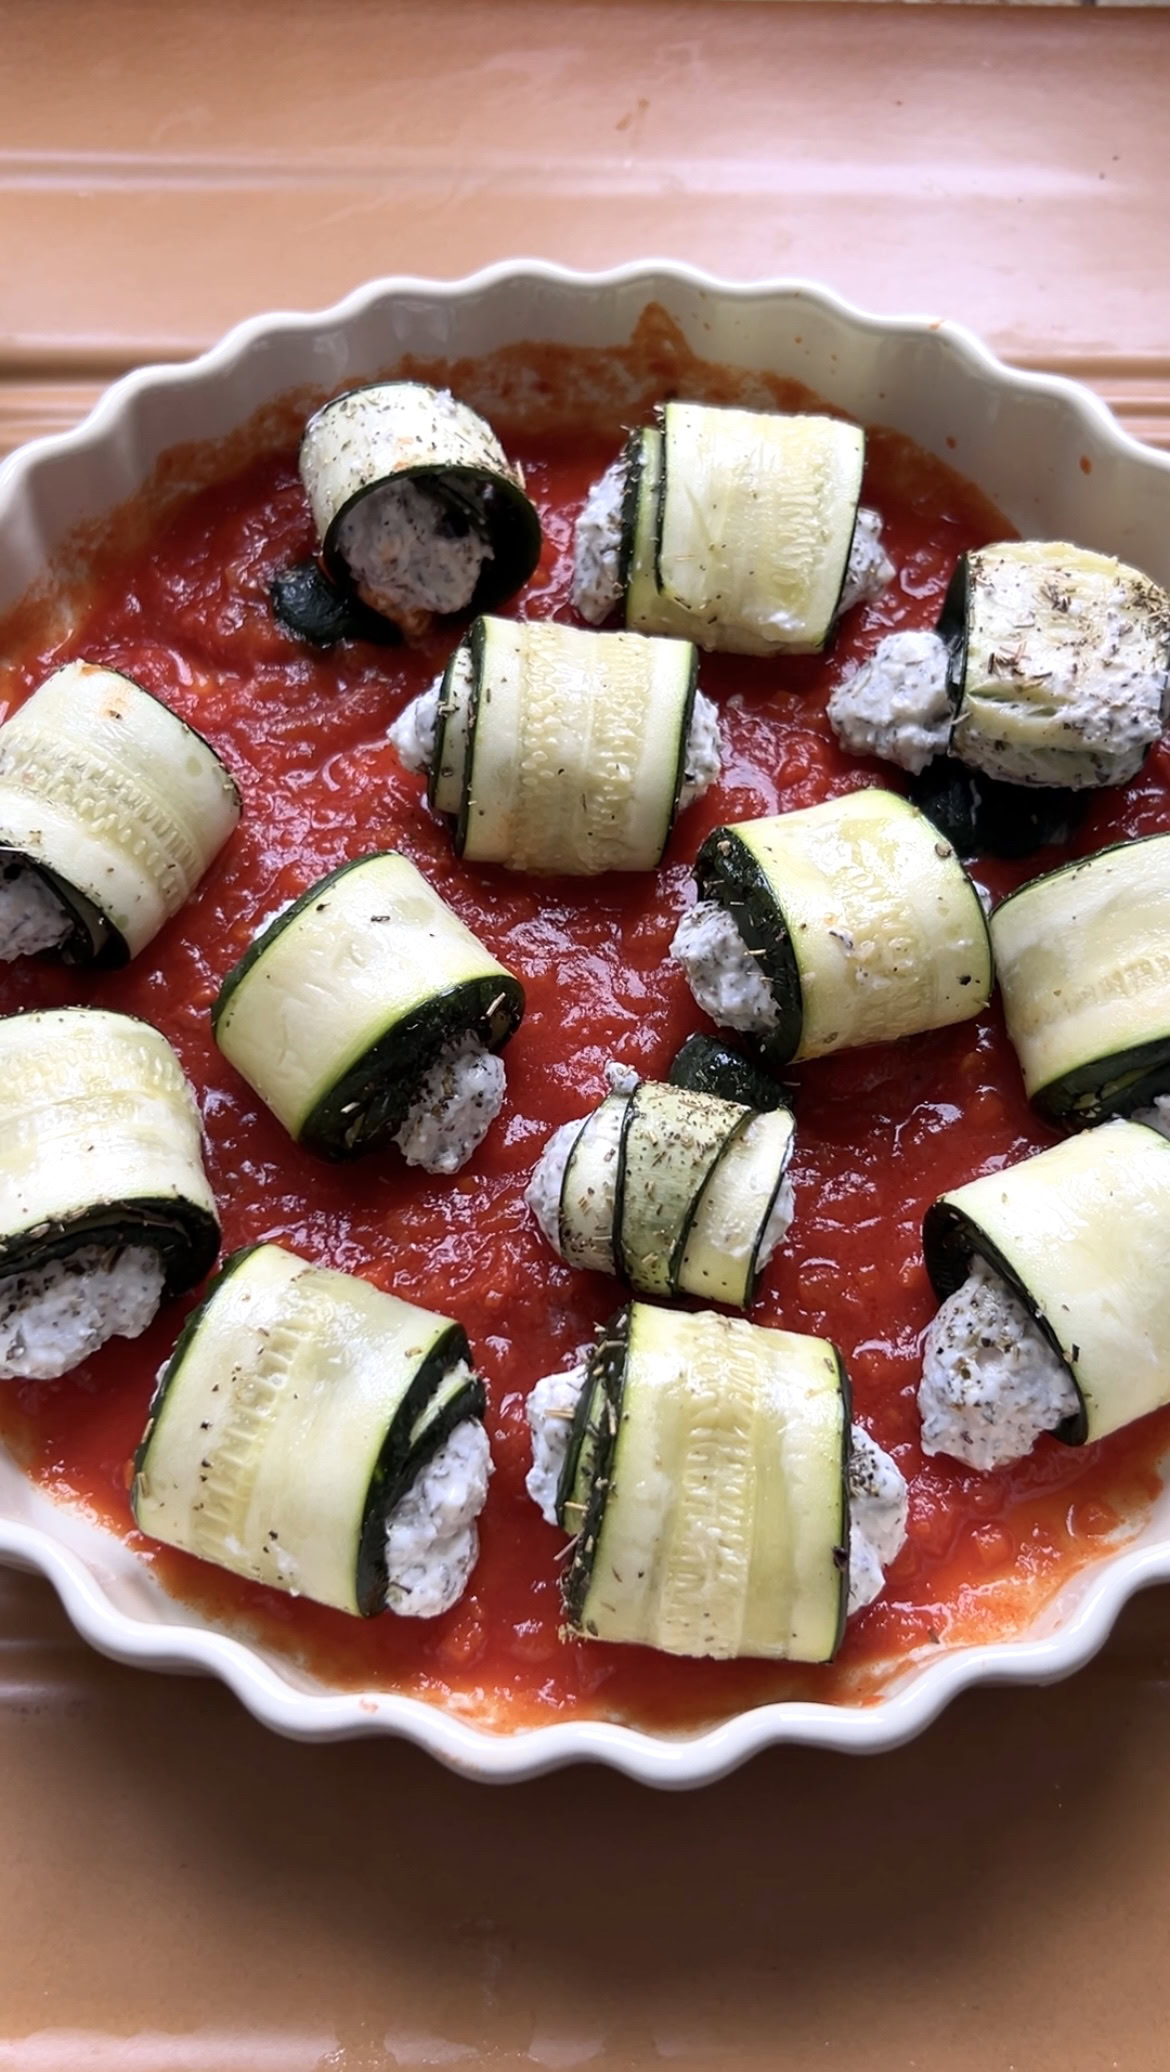 The zucchini involtini are placed in the large round dish of tomato sauce.